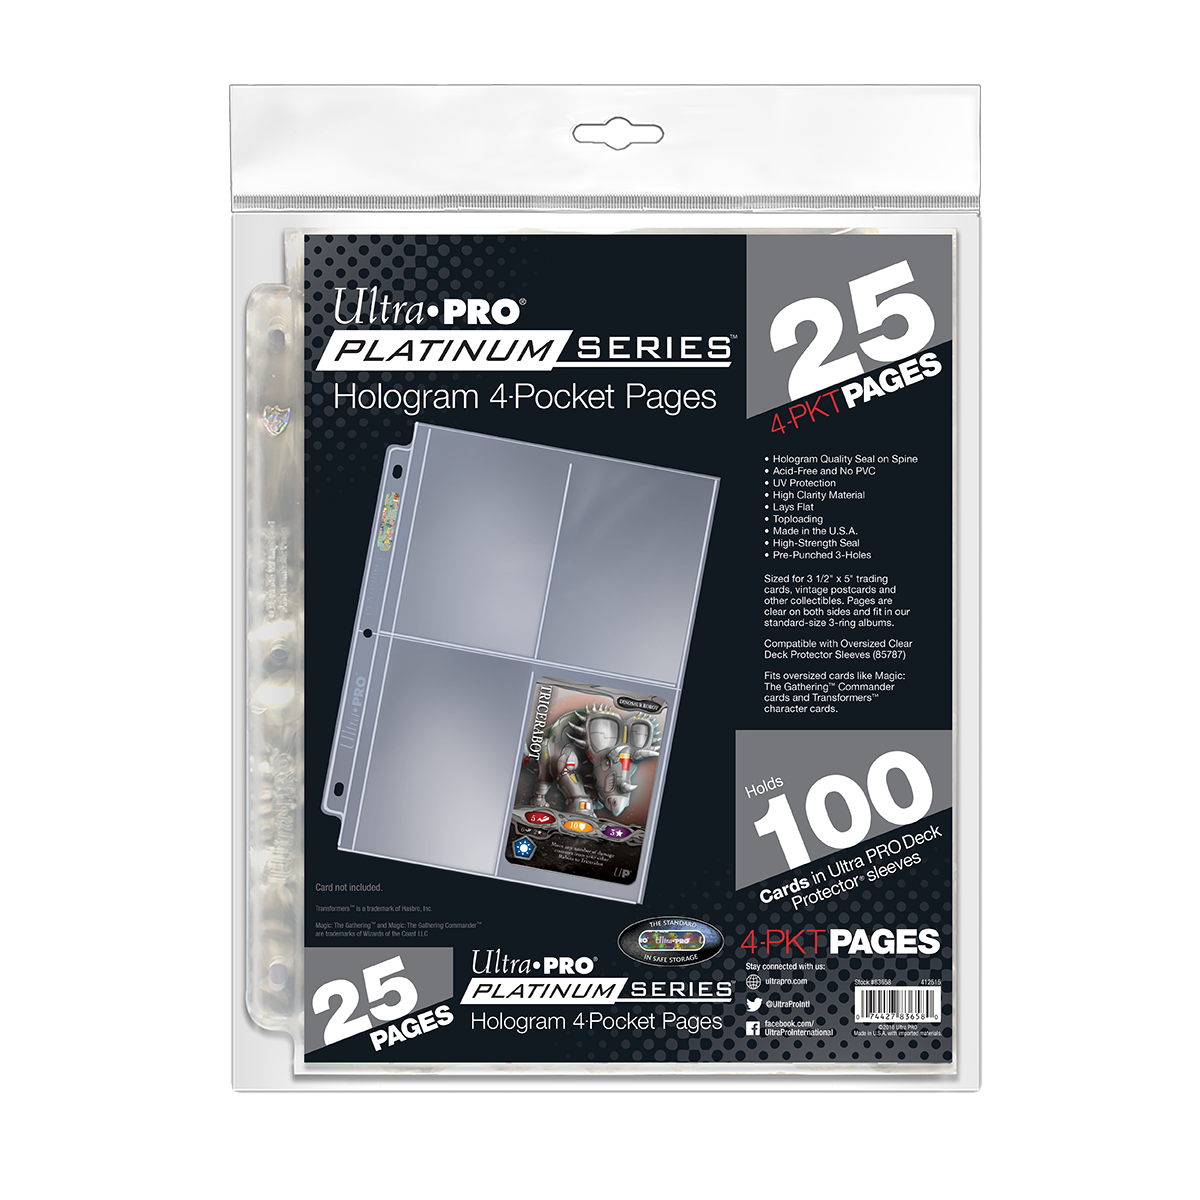 Platinum Series 4-Pocket Pages (25ct) for 3.5" x 5" Cards | Ultra PRO International